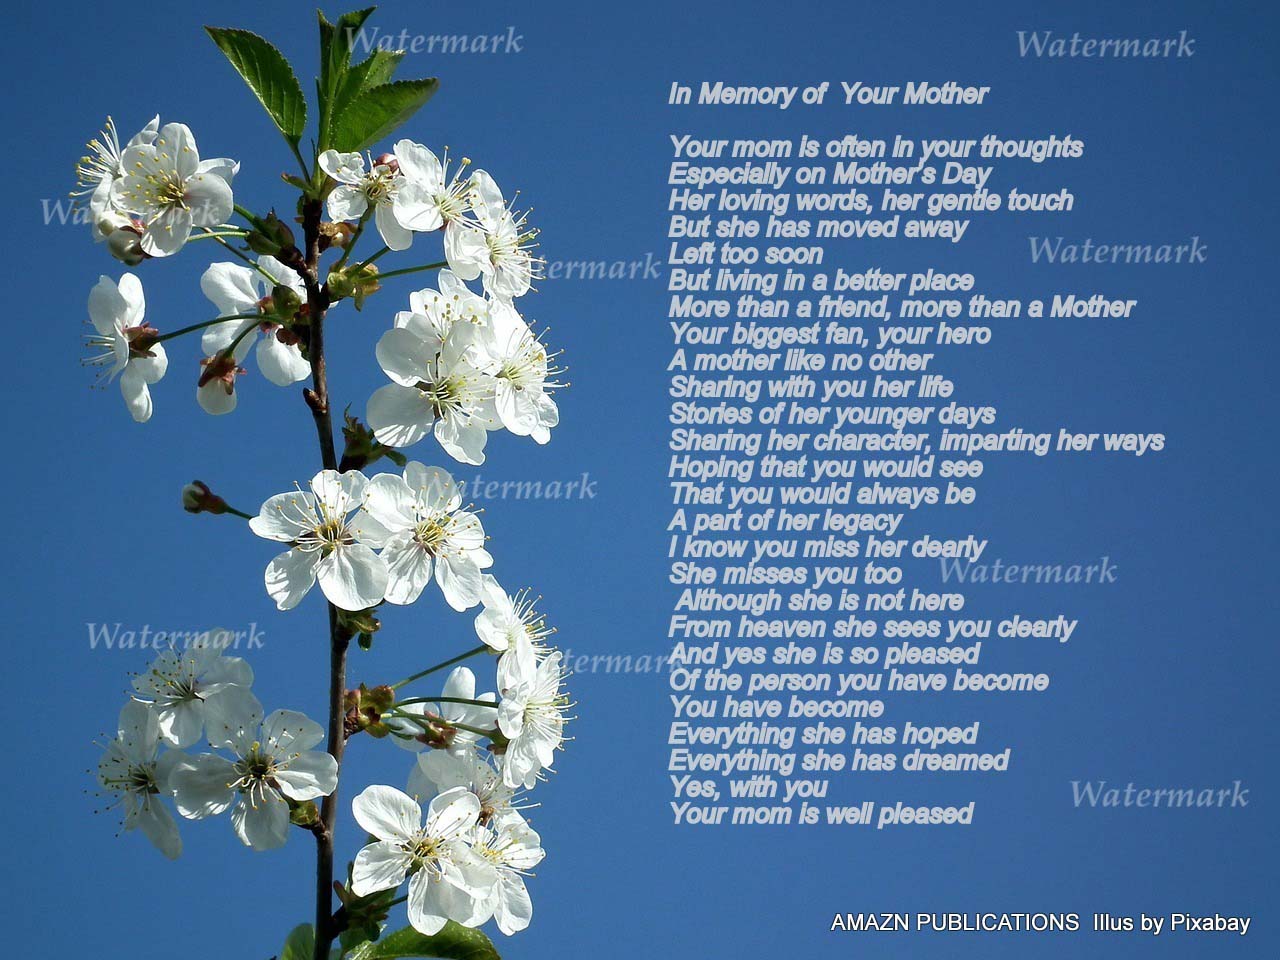 In Memory of Your Mother on Mother’s Day